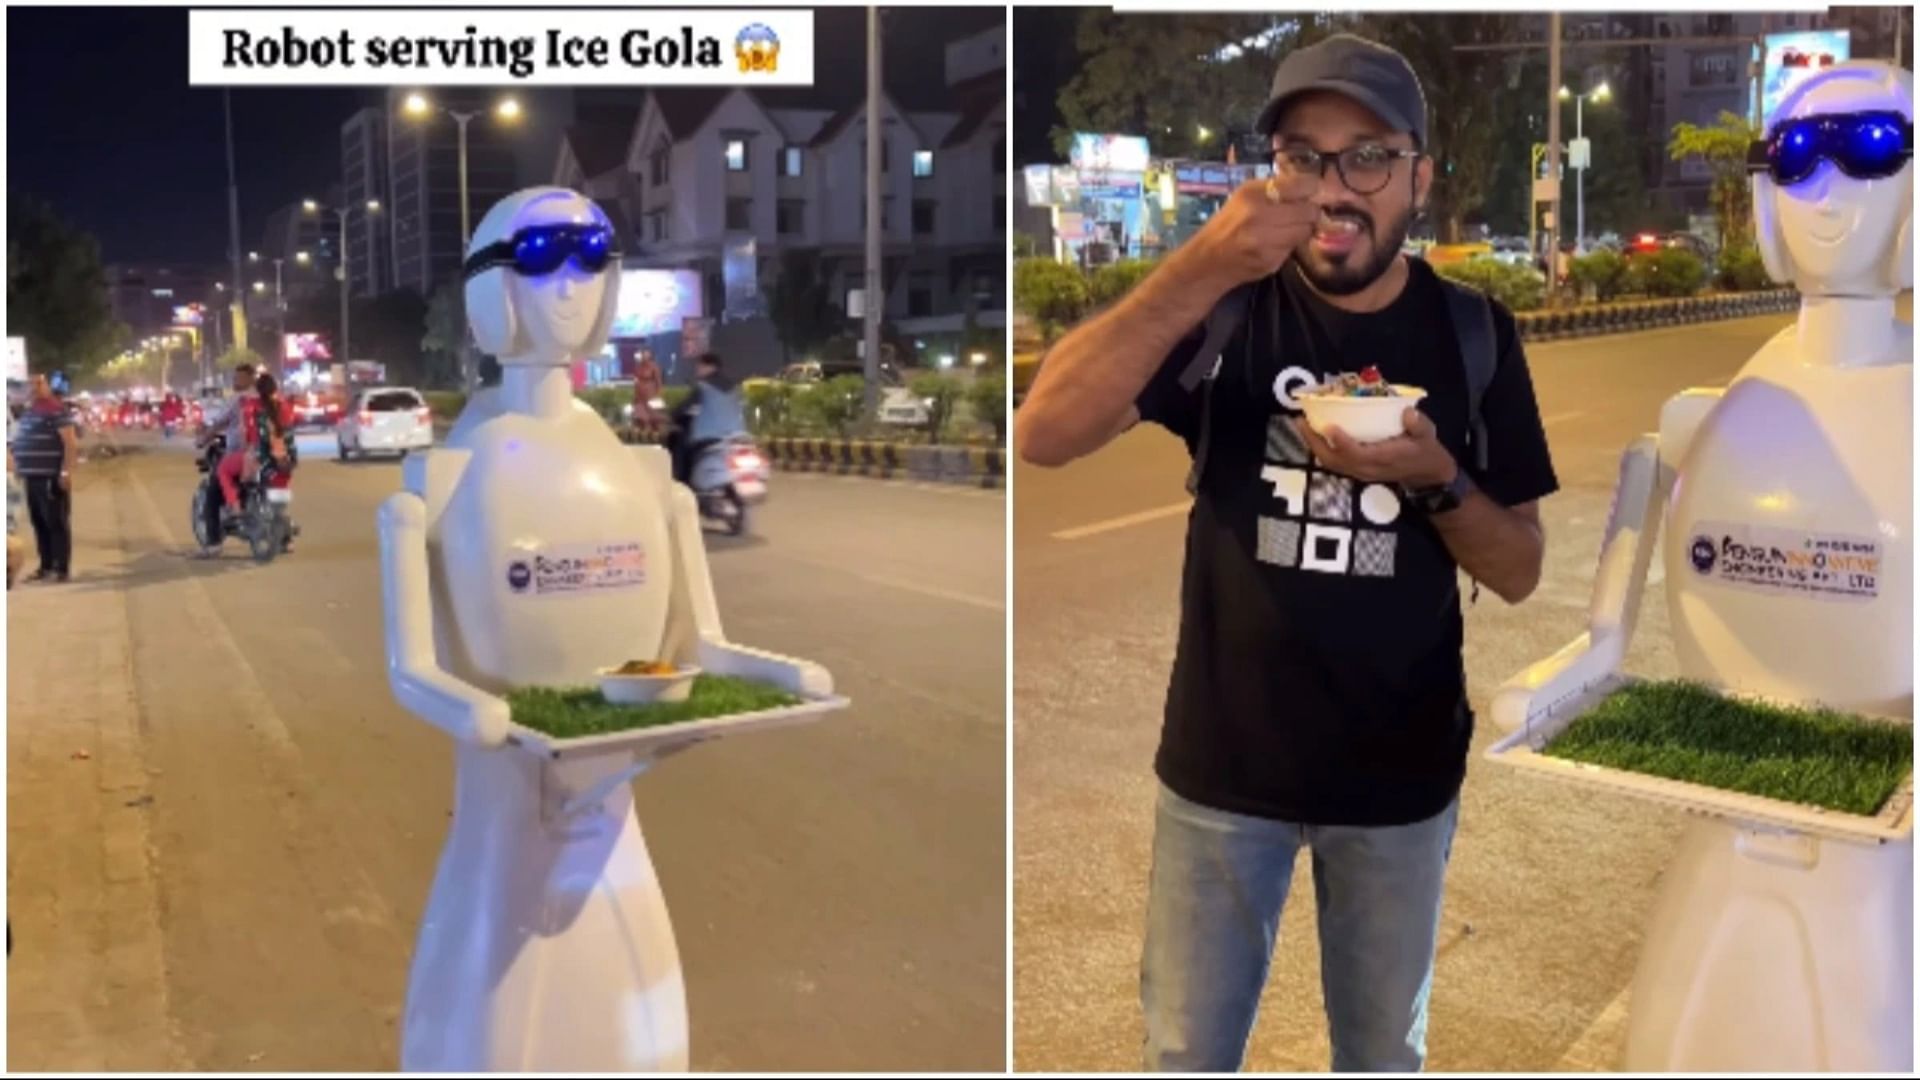 Robotic cafe Meet Aisha, the ice gola serving robot at Ahmedabad's robotic cafe Watch Video